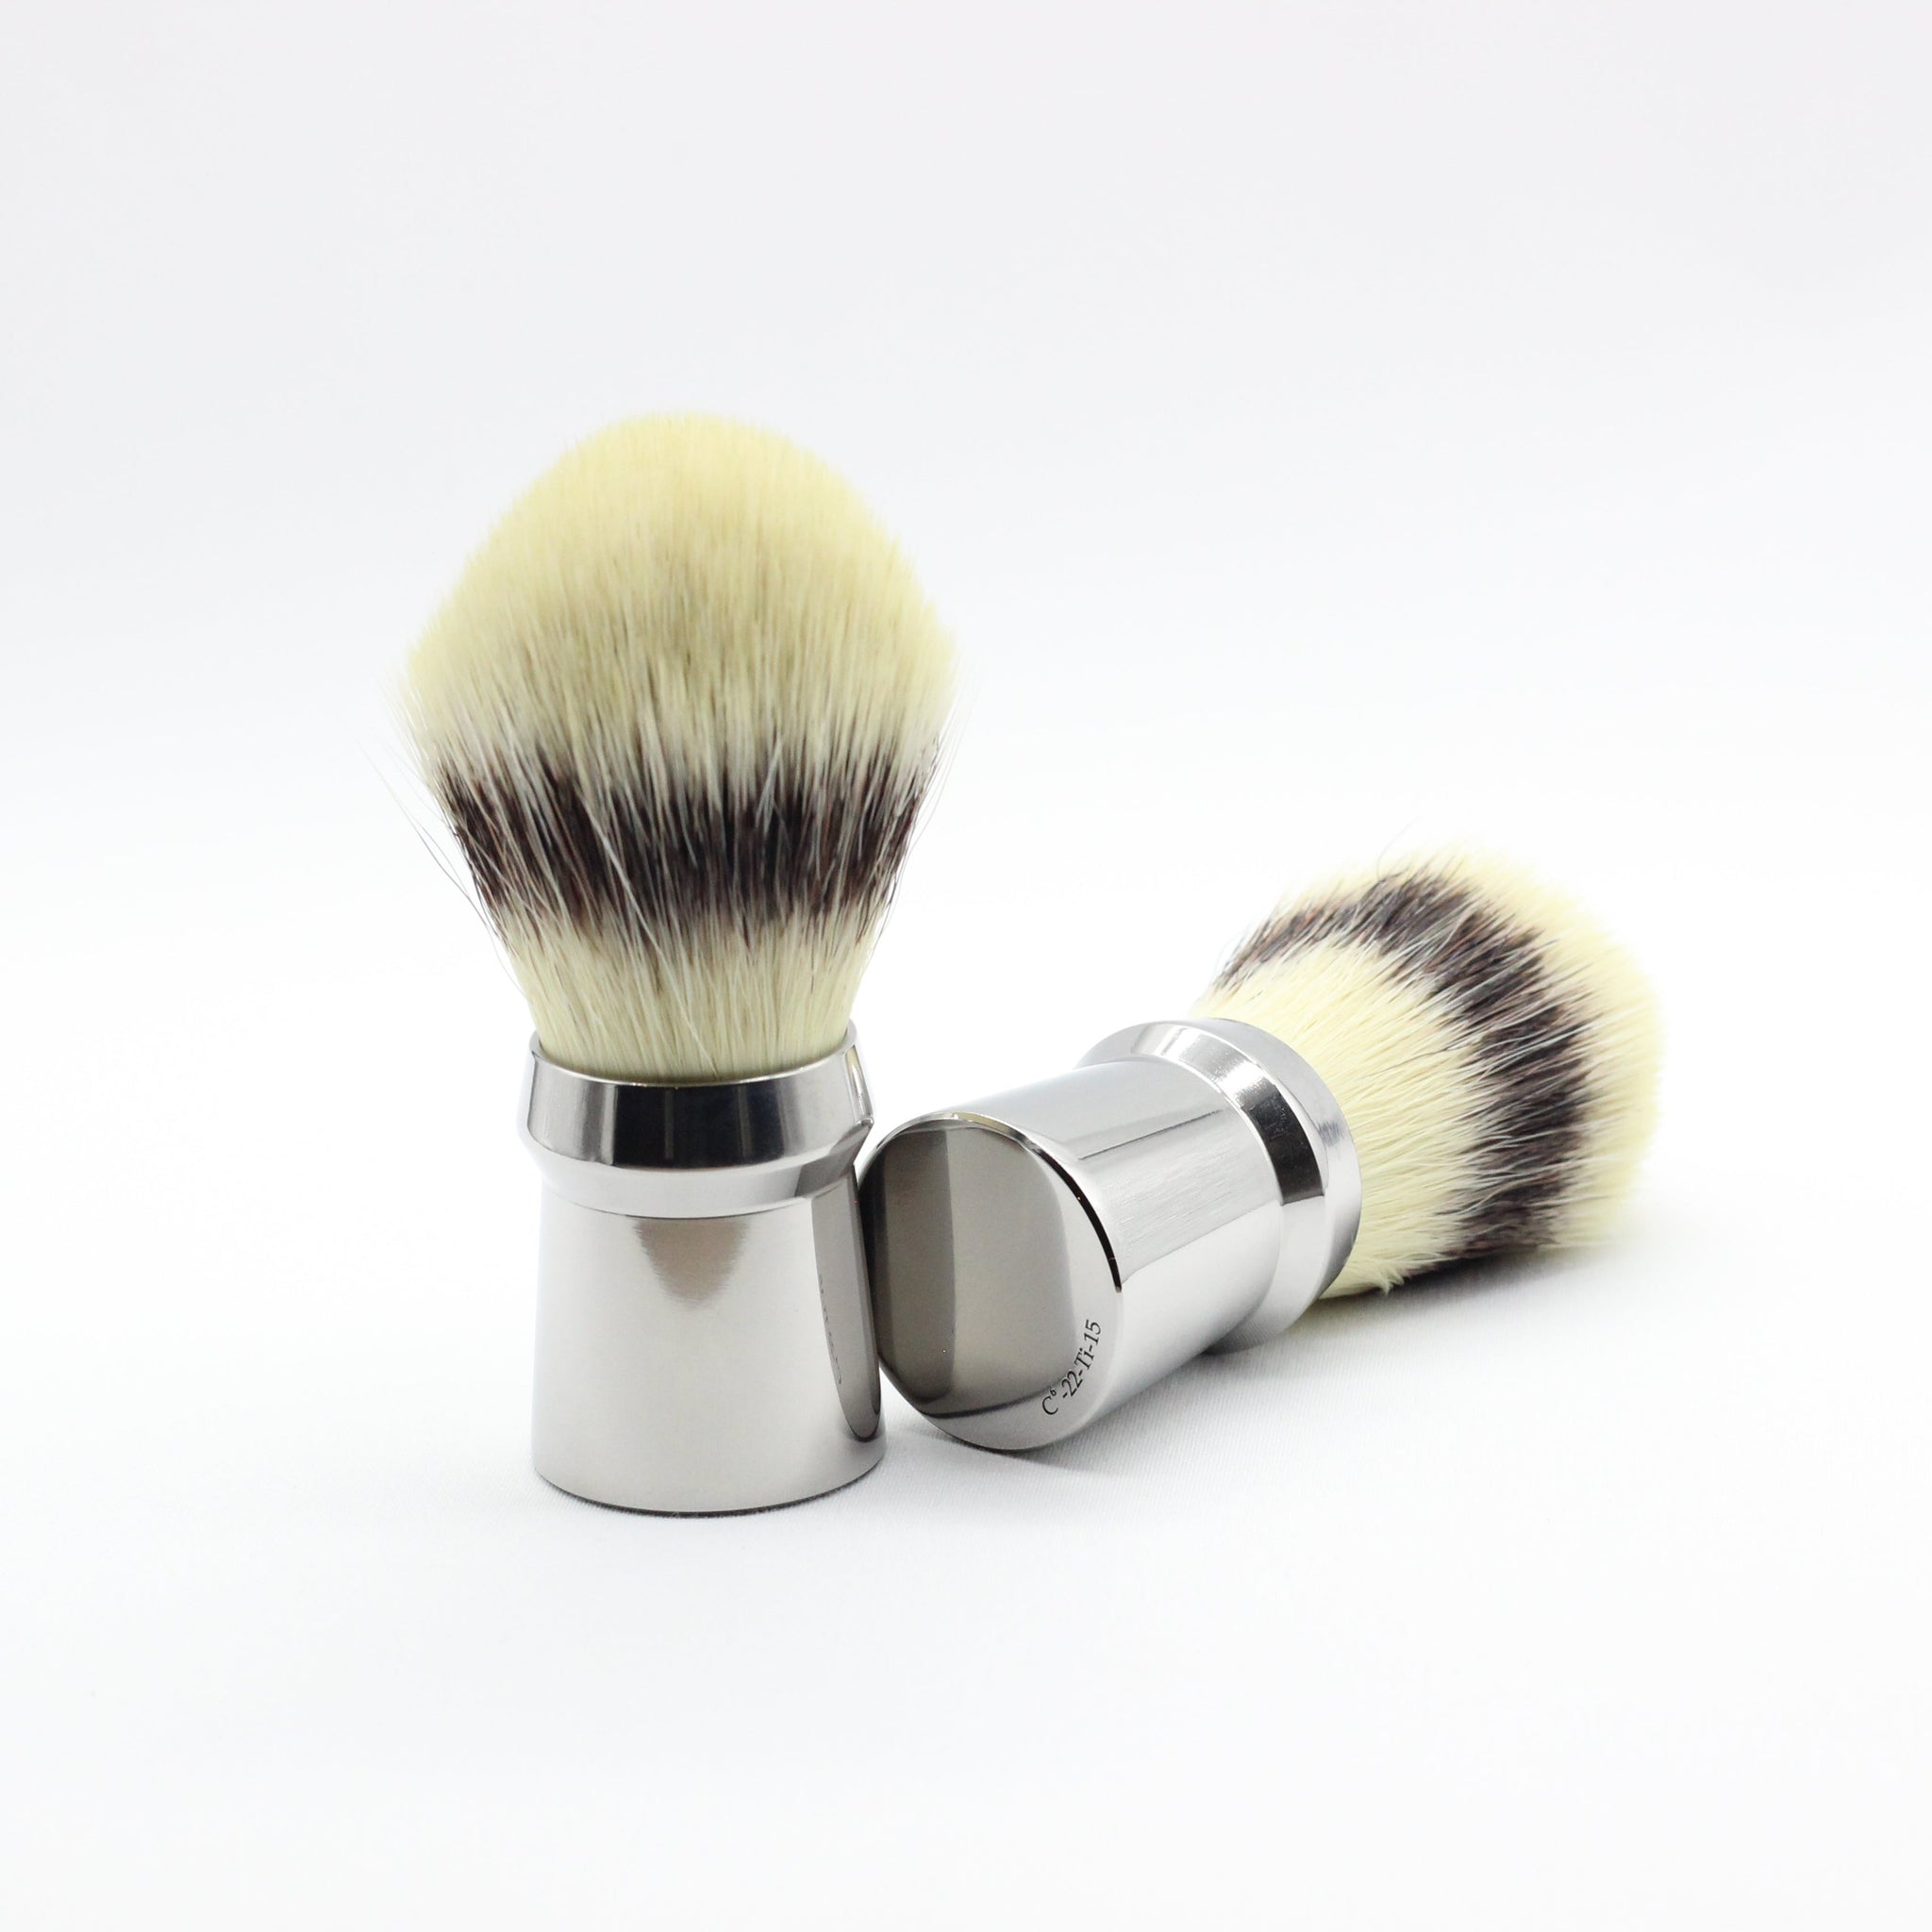 Titanium Shaving brush - high polish finish to reduce places where dirt and bacteria can collect - Used to lift hairs and soften skin while shaving. Essential part of a grooming kit